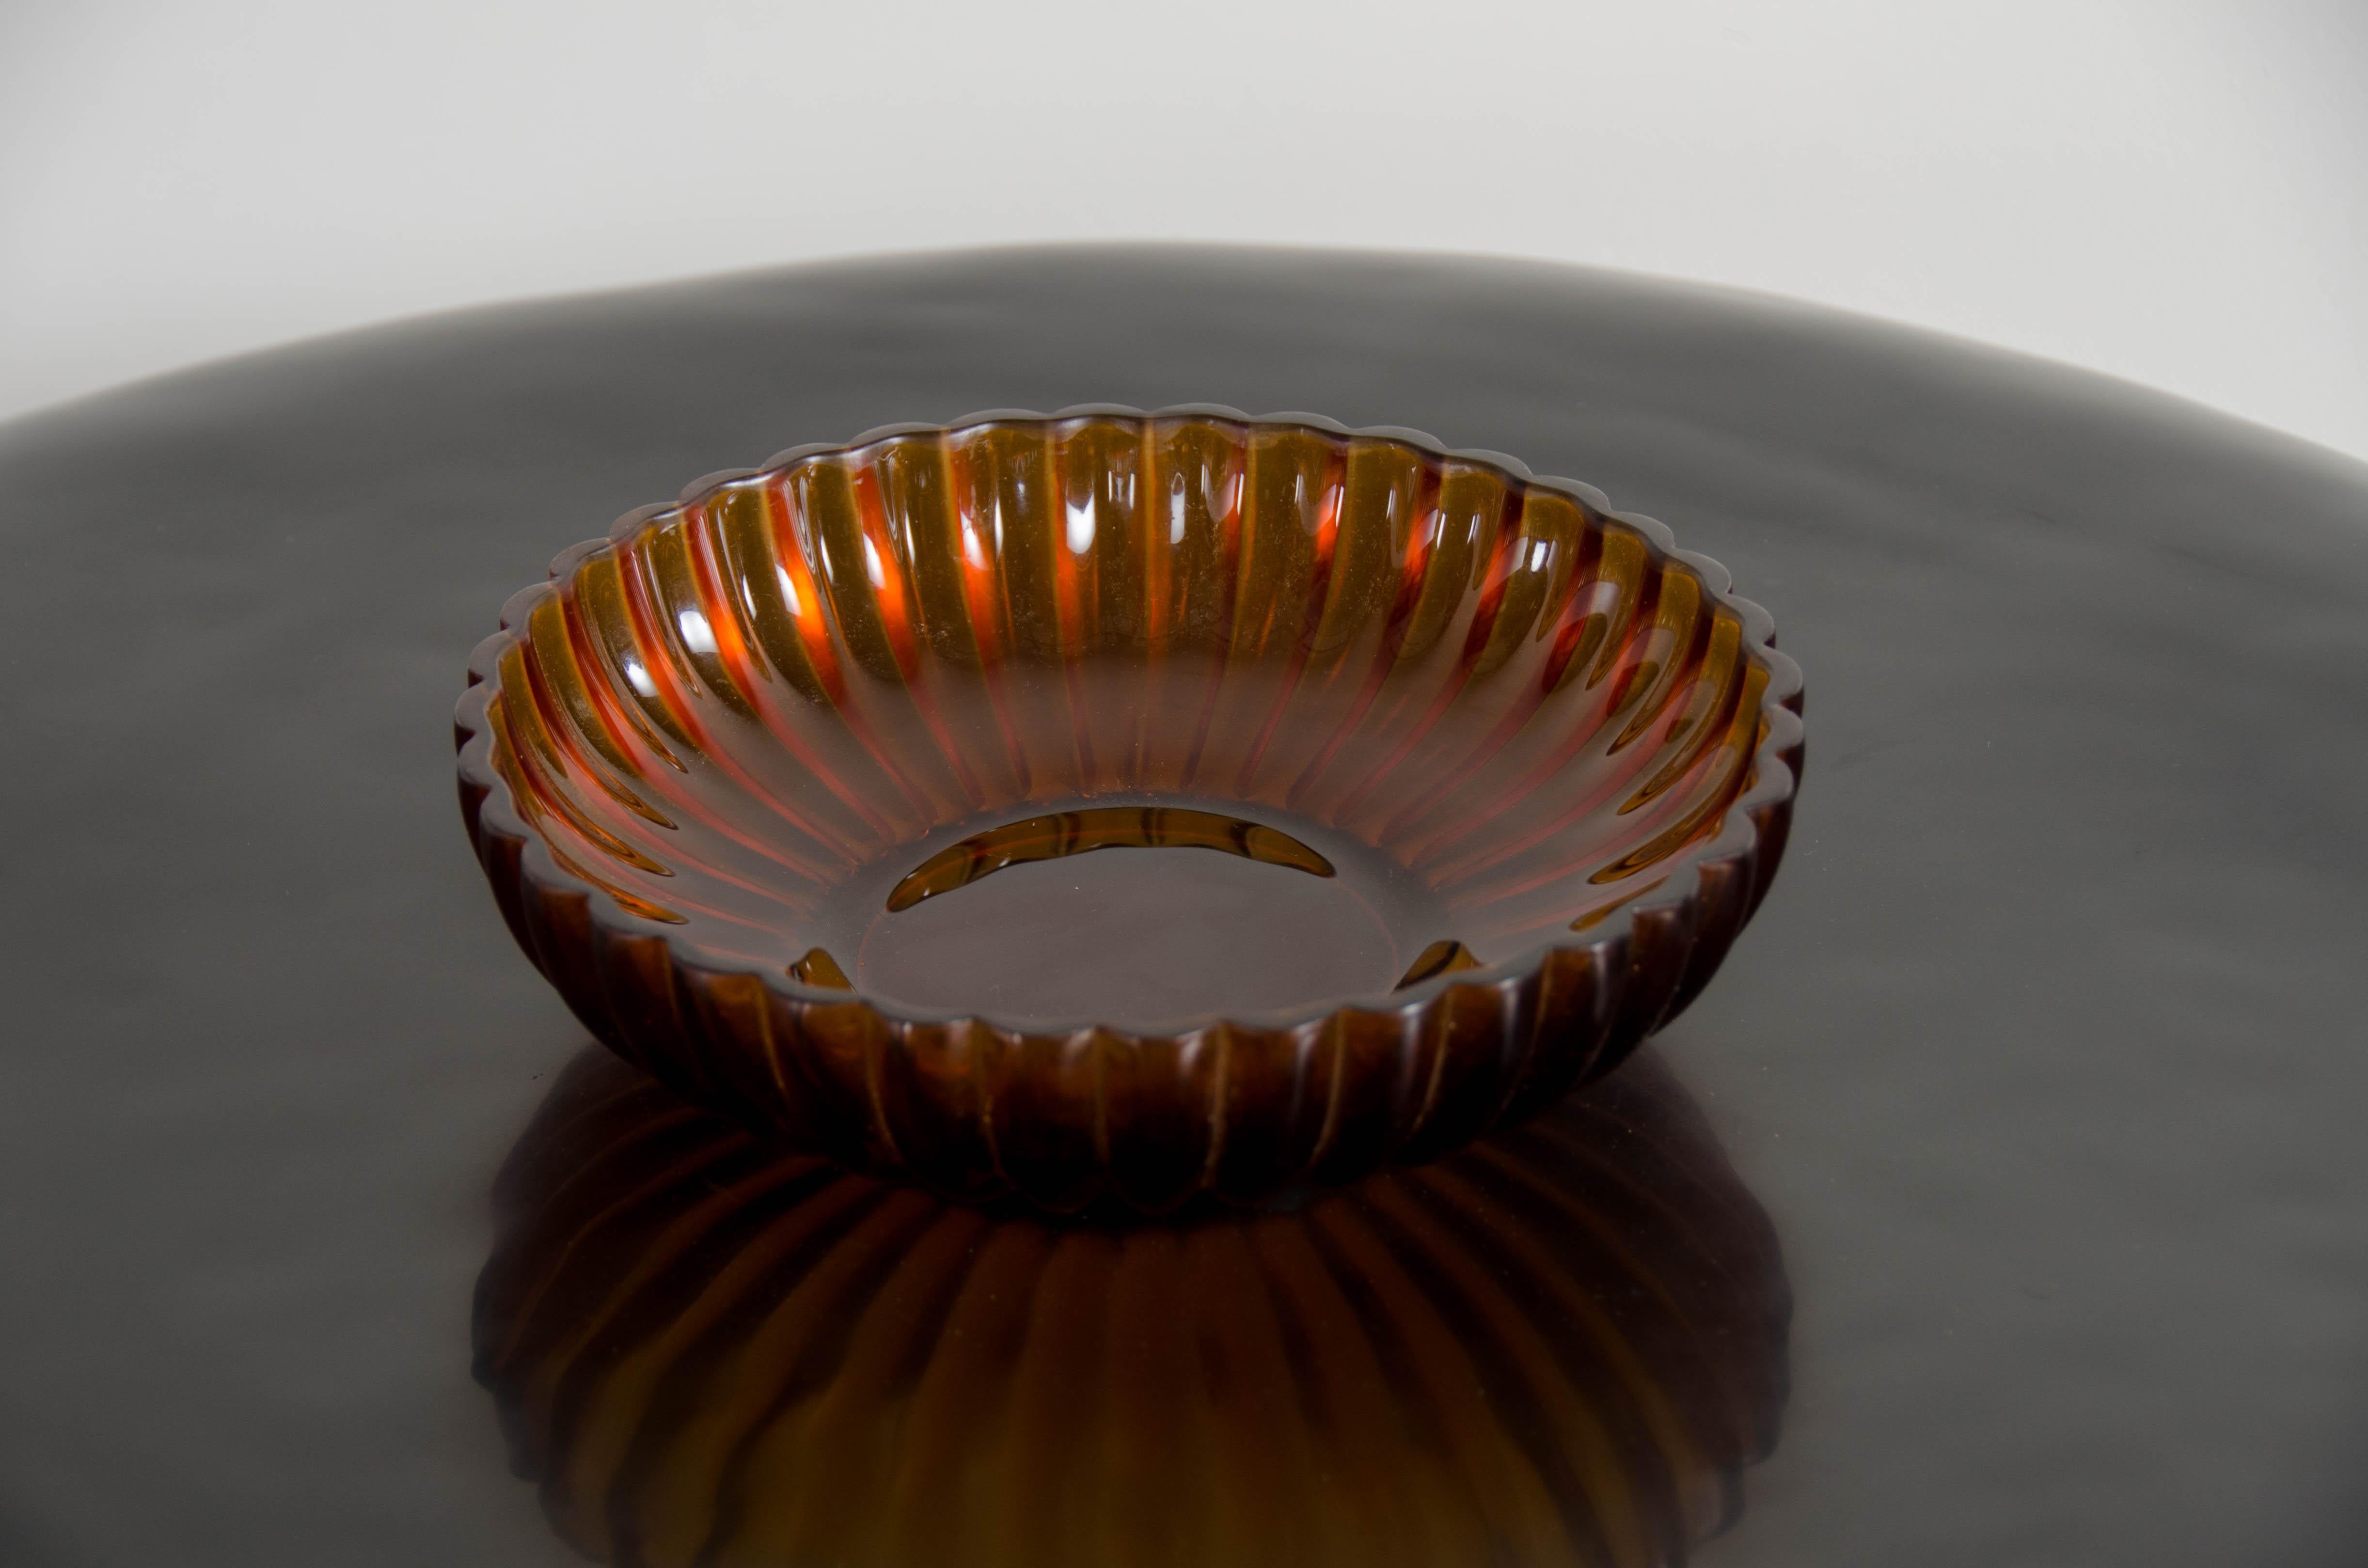 Chrysanthemum bowl 
Amber Peking glass
Hand blown glass
Hand carved
Limited Edition

Peking glass refers to the high-quality glass art produced by the imperial and commercial workshops in Beijing during the Ching Dynasty, China 1644-1911.